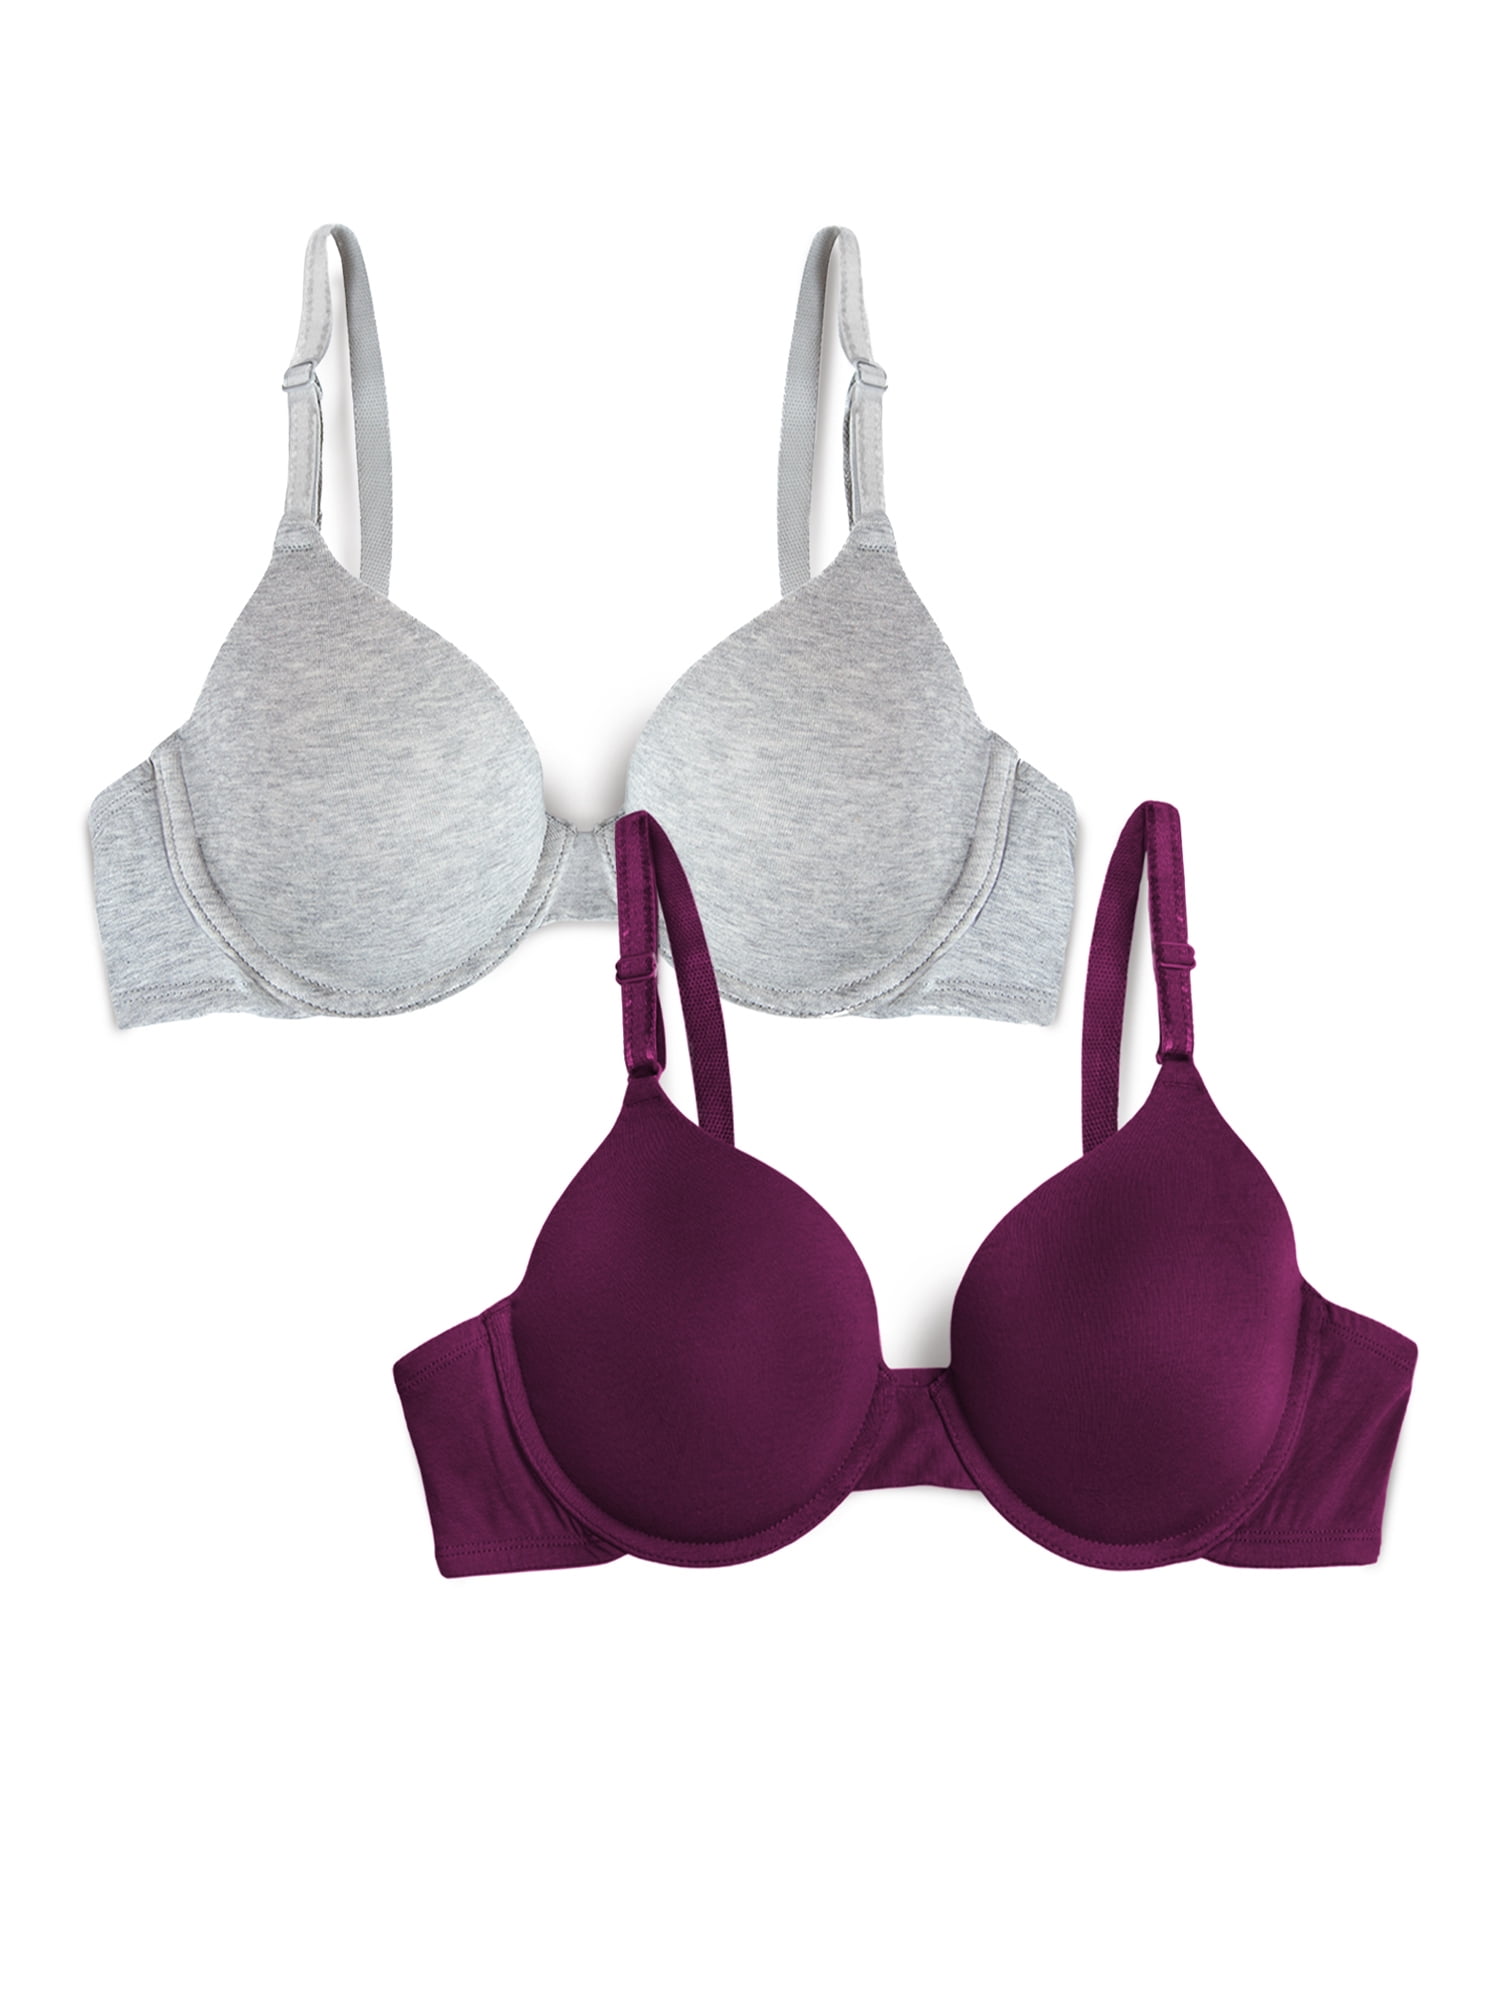 Fruit of the Loom Wireless Bra 2 Pack, Style FT942, Sizes S to XXXL